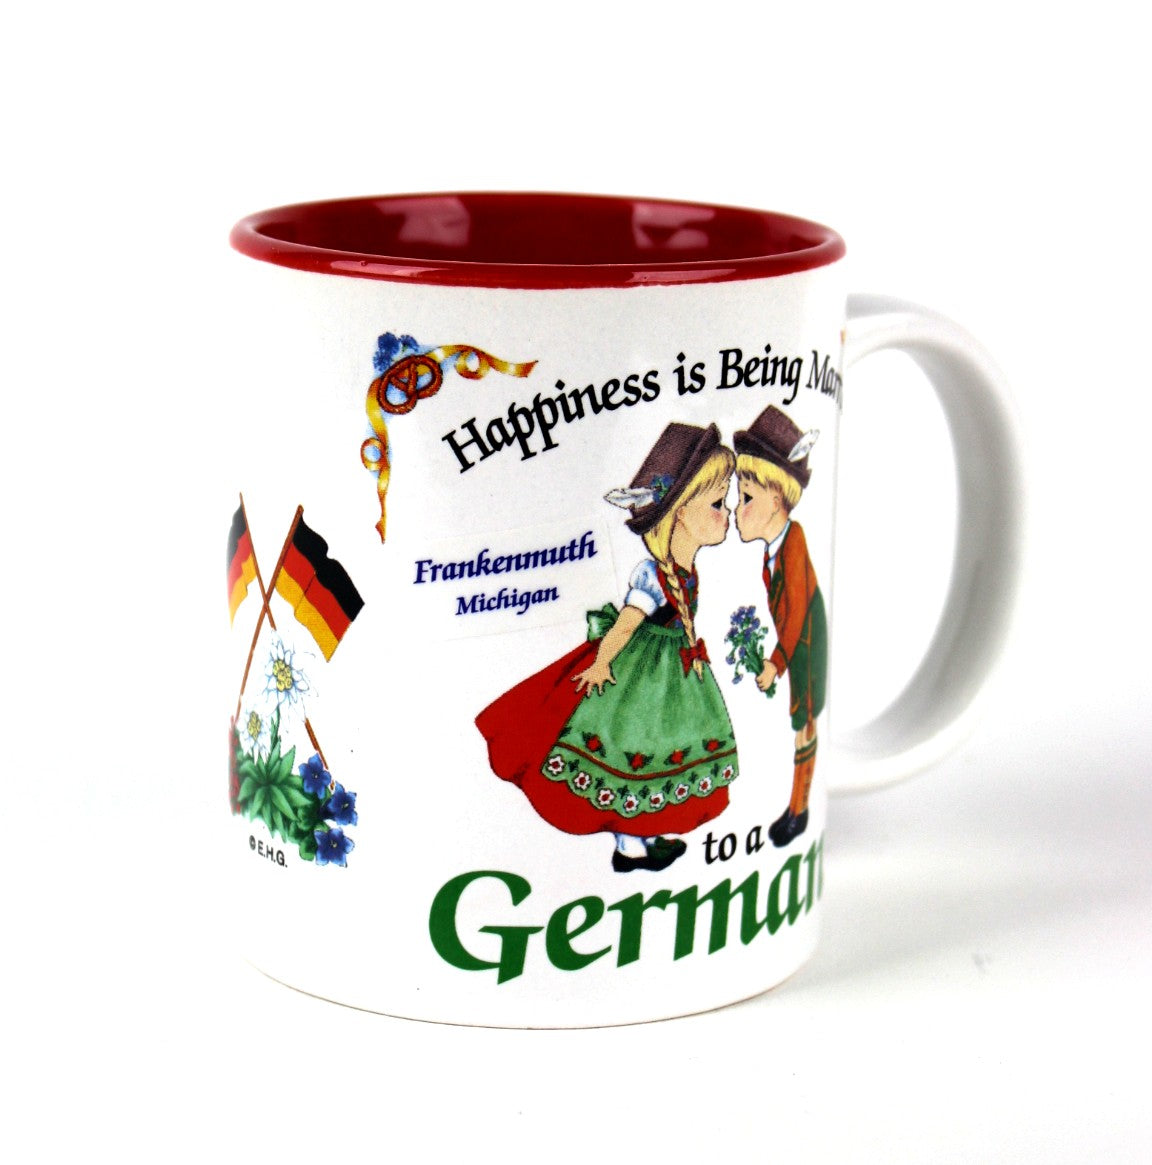 "Happiness is Being Married To A German" Mug